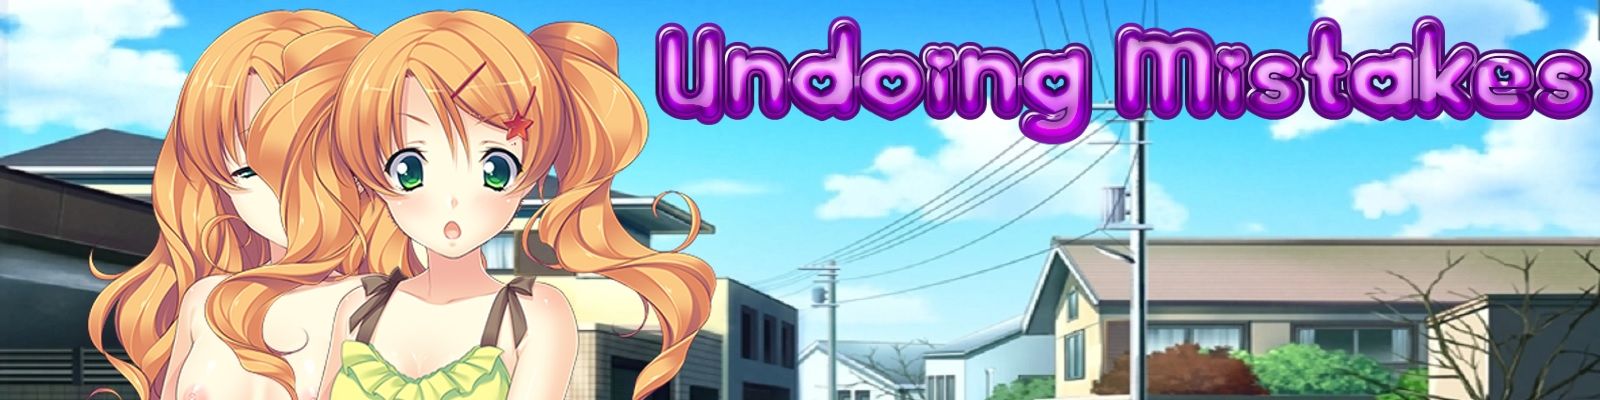 Undoing Mistakes Apk Android Hentai Game Download (1)